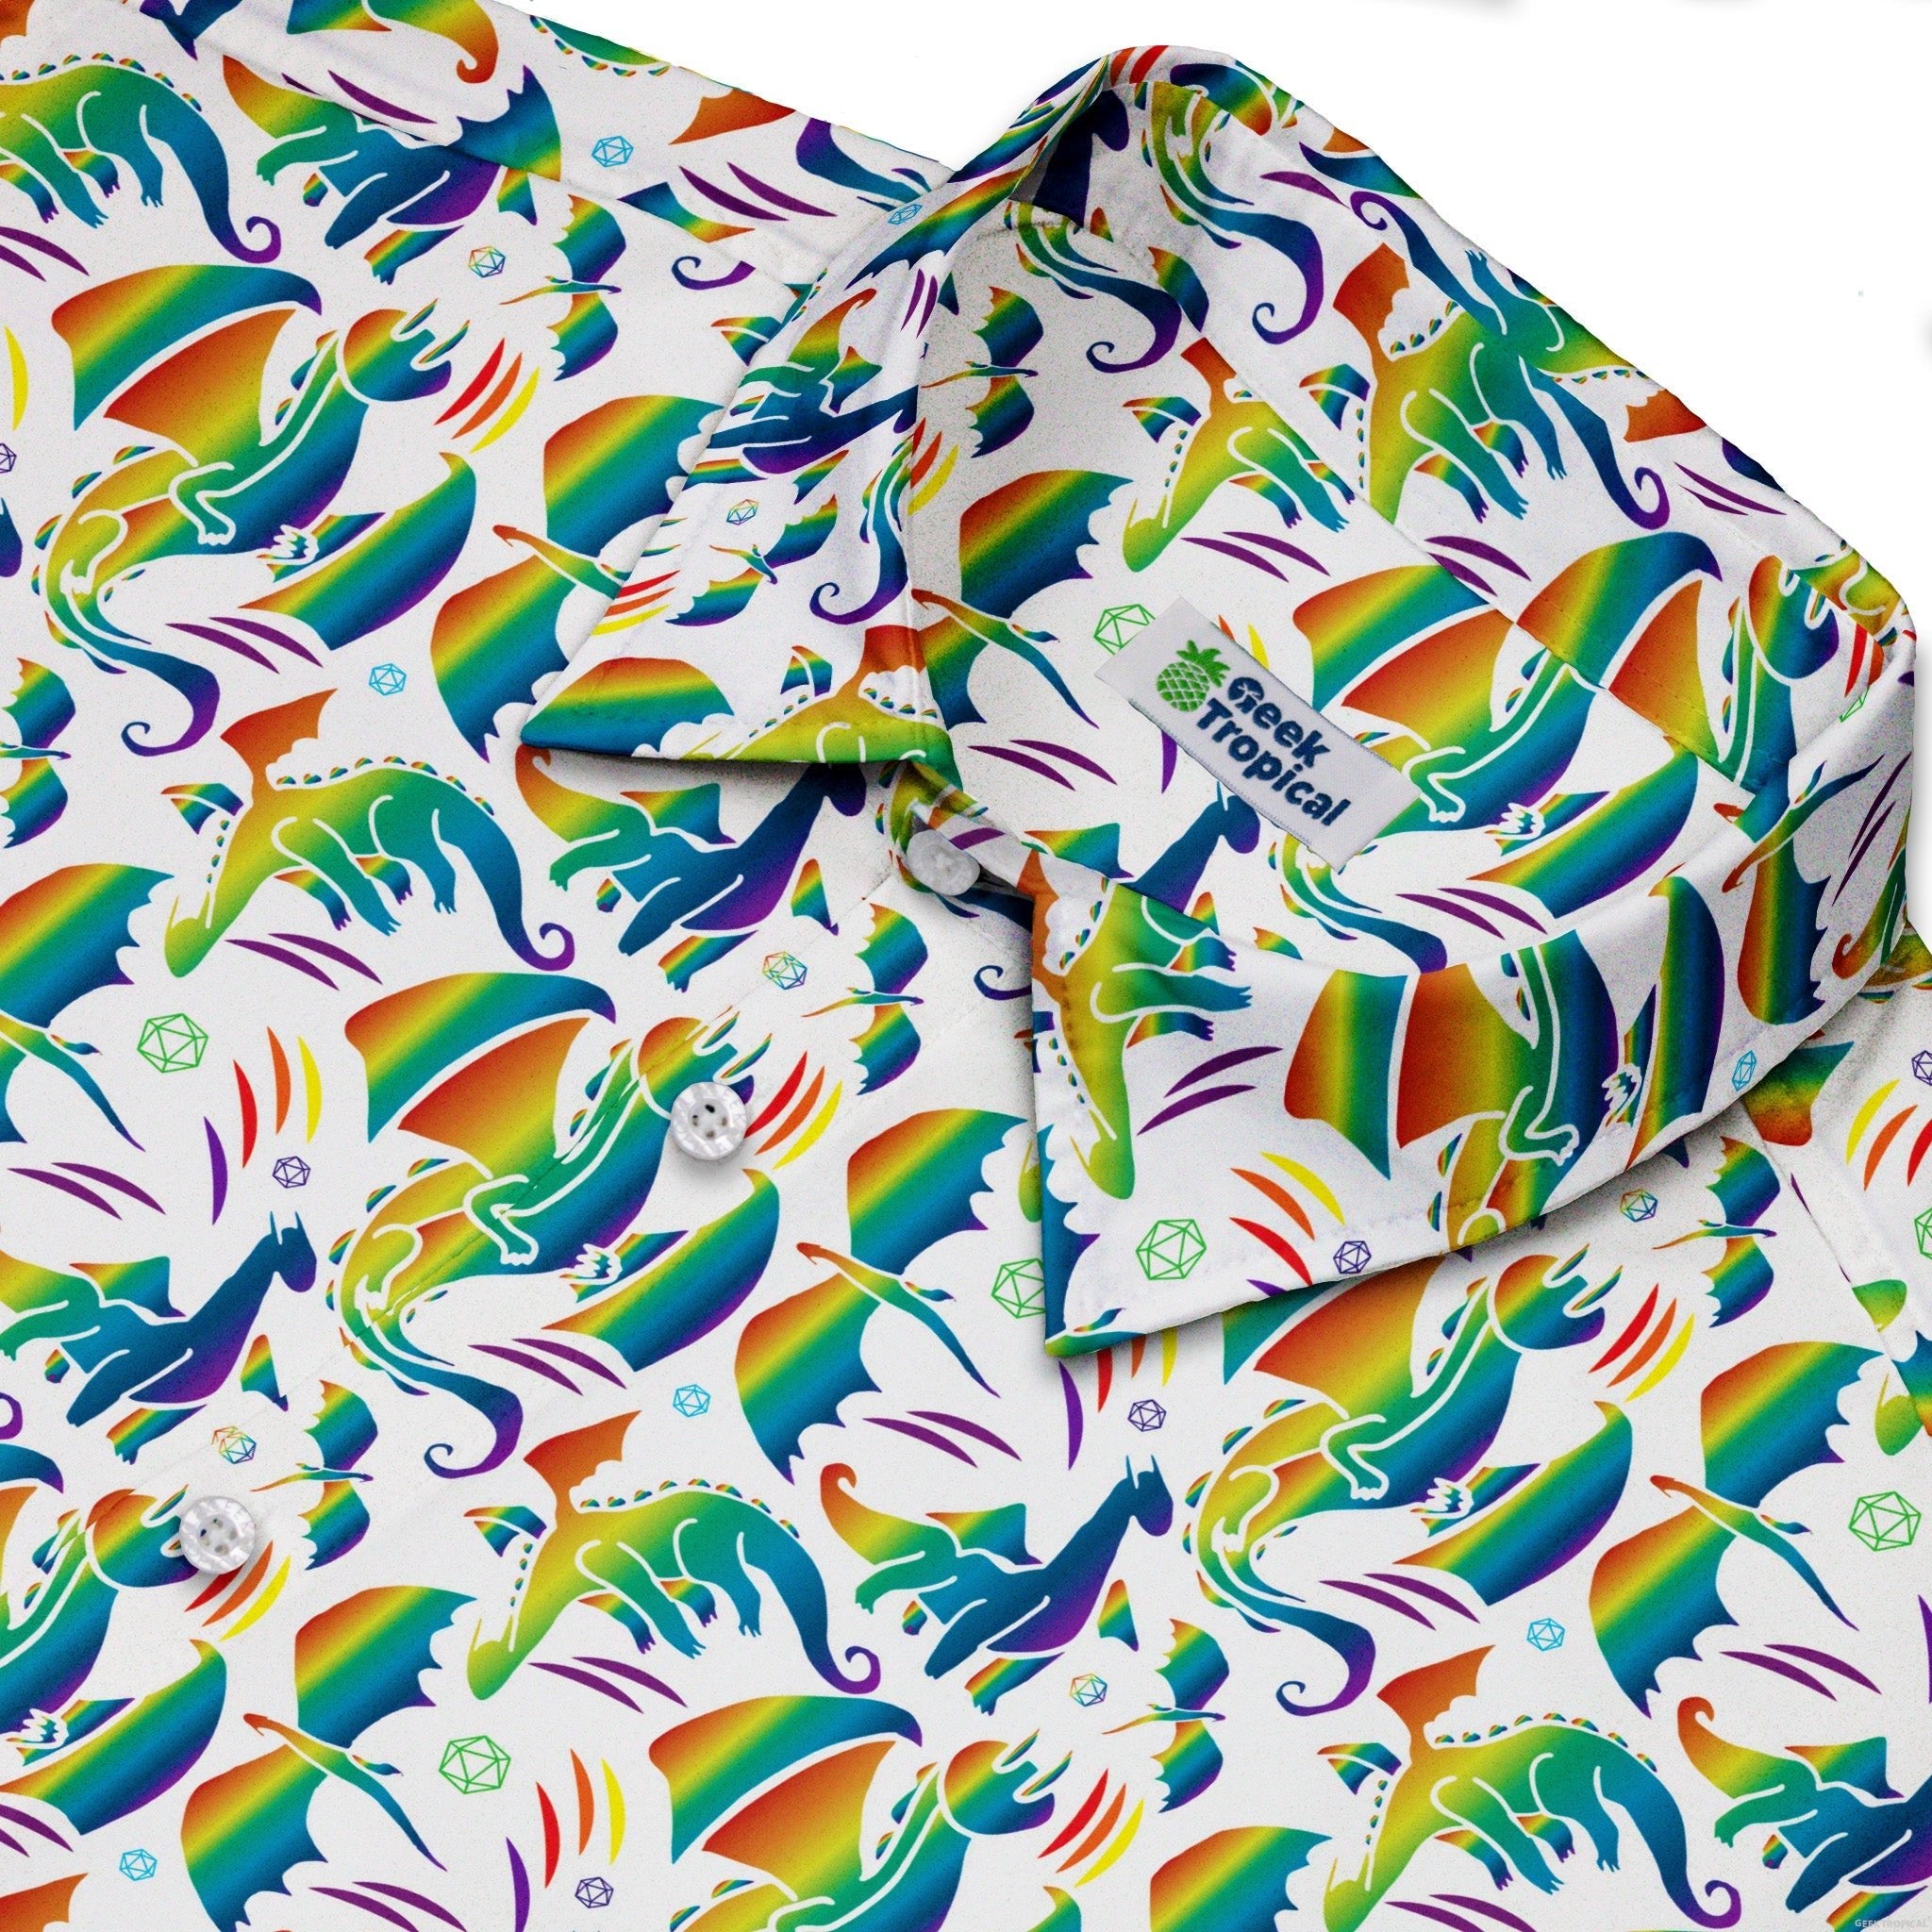 Rainbow Dragons DND Dice White Button Up Shirt - adult sizing - Animal Patterns - Design by Heather Davenport